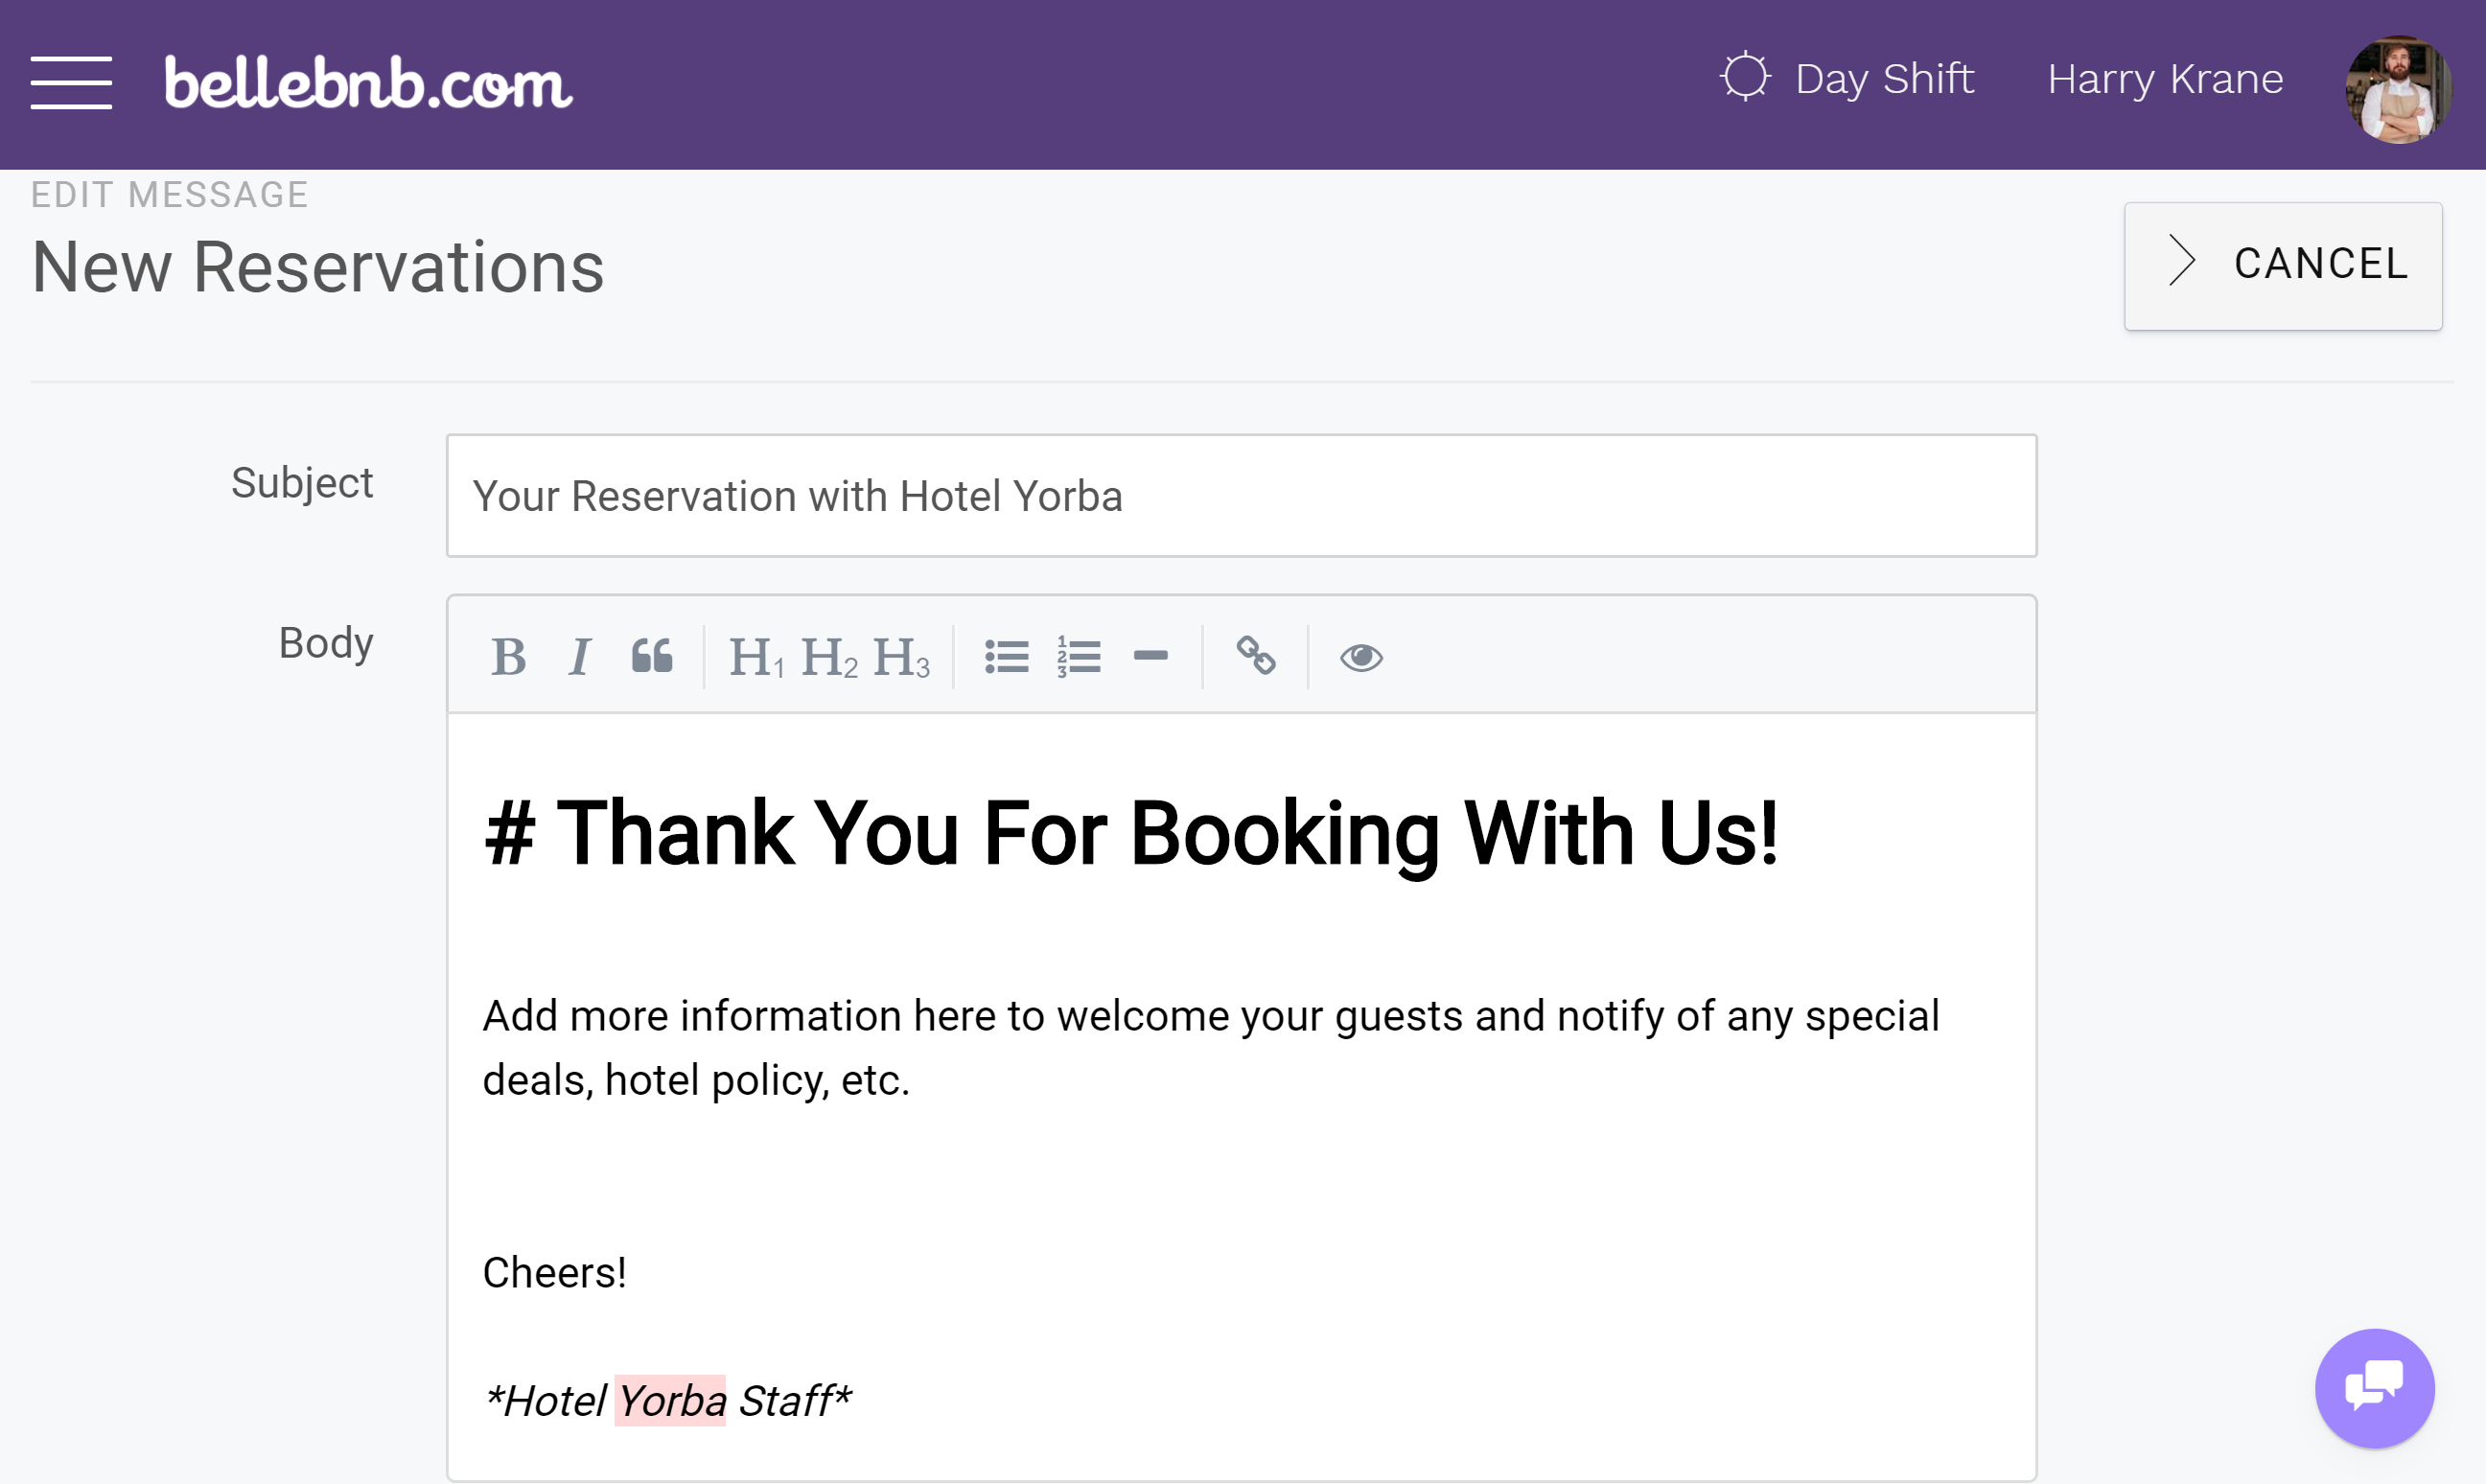 Hotel CRM Customer Relationship Management, Hotel Management HTML Emails You can now create custom emails for your daily hotel activities. You can create a custom message for new reservations, check-outs, and cancellations. Edit your messages in HTML to send out automatically as part of your bookings flow.